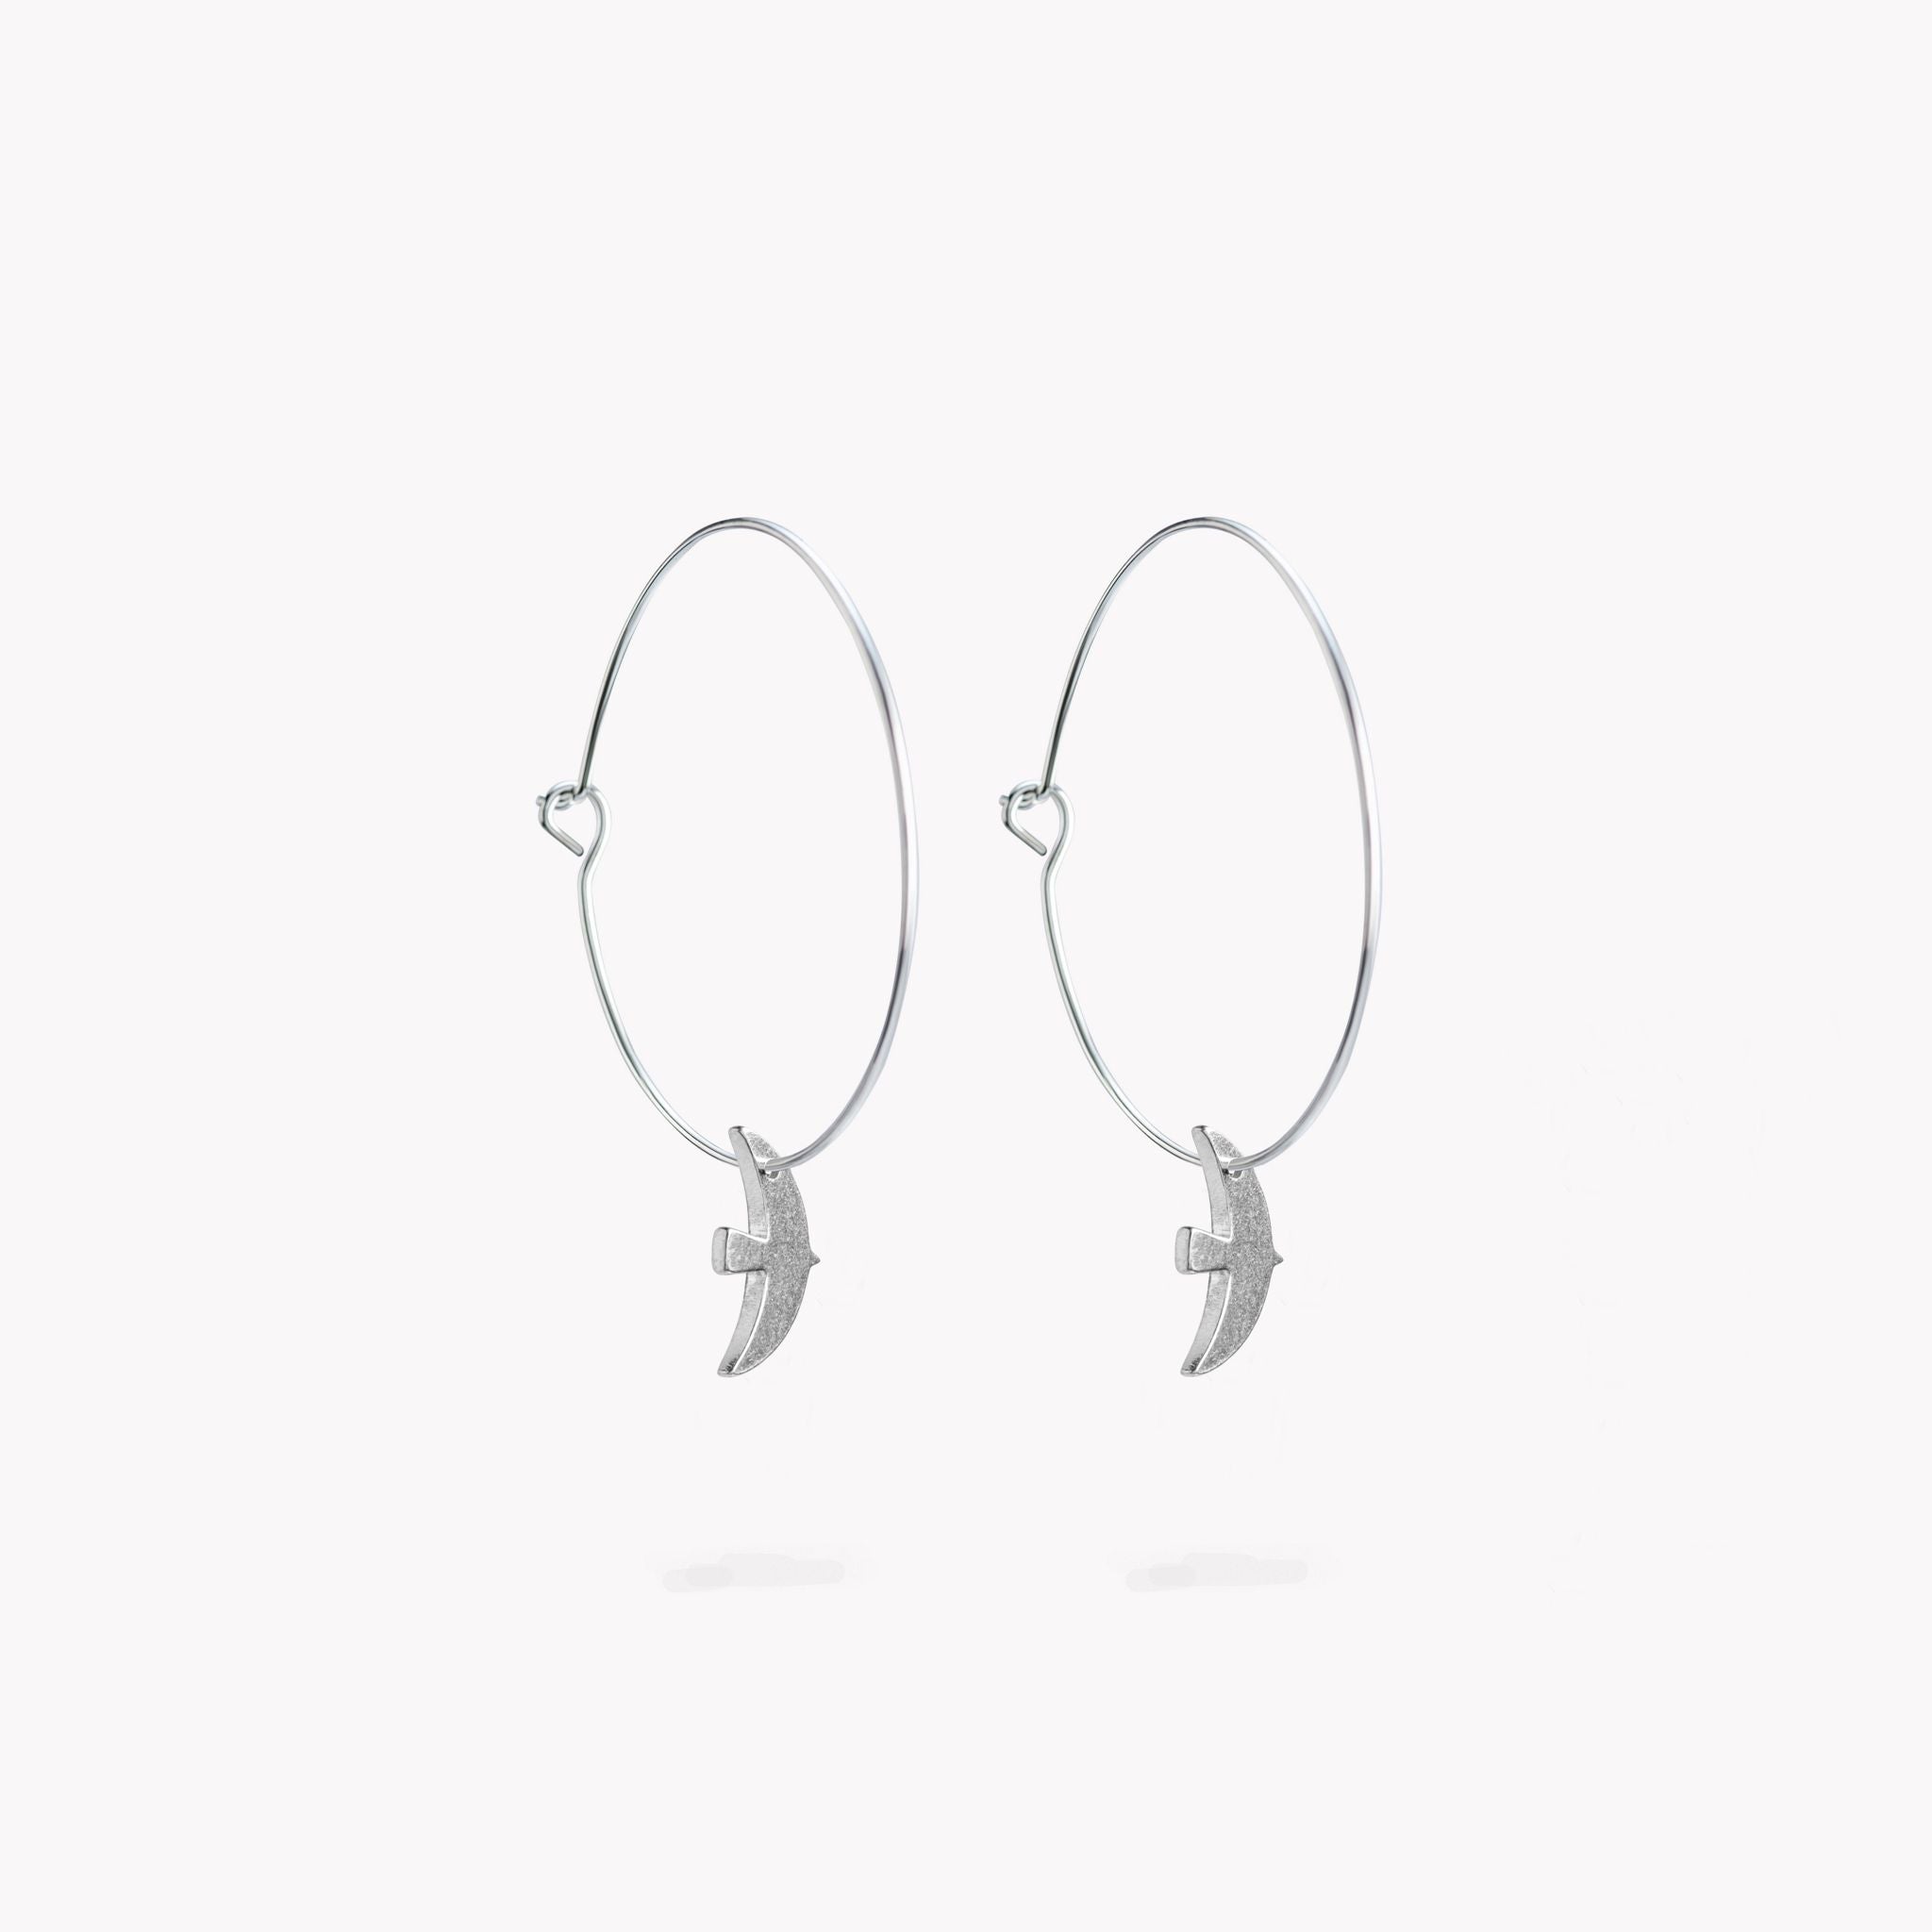 A stylish & dynamic pair of hoop earrings with a simple pewter bird design.